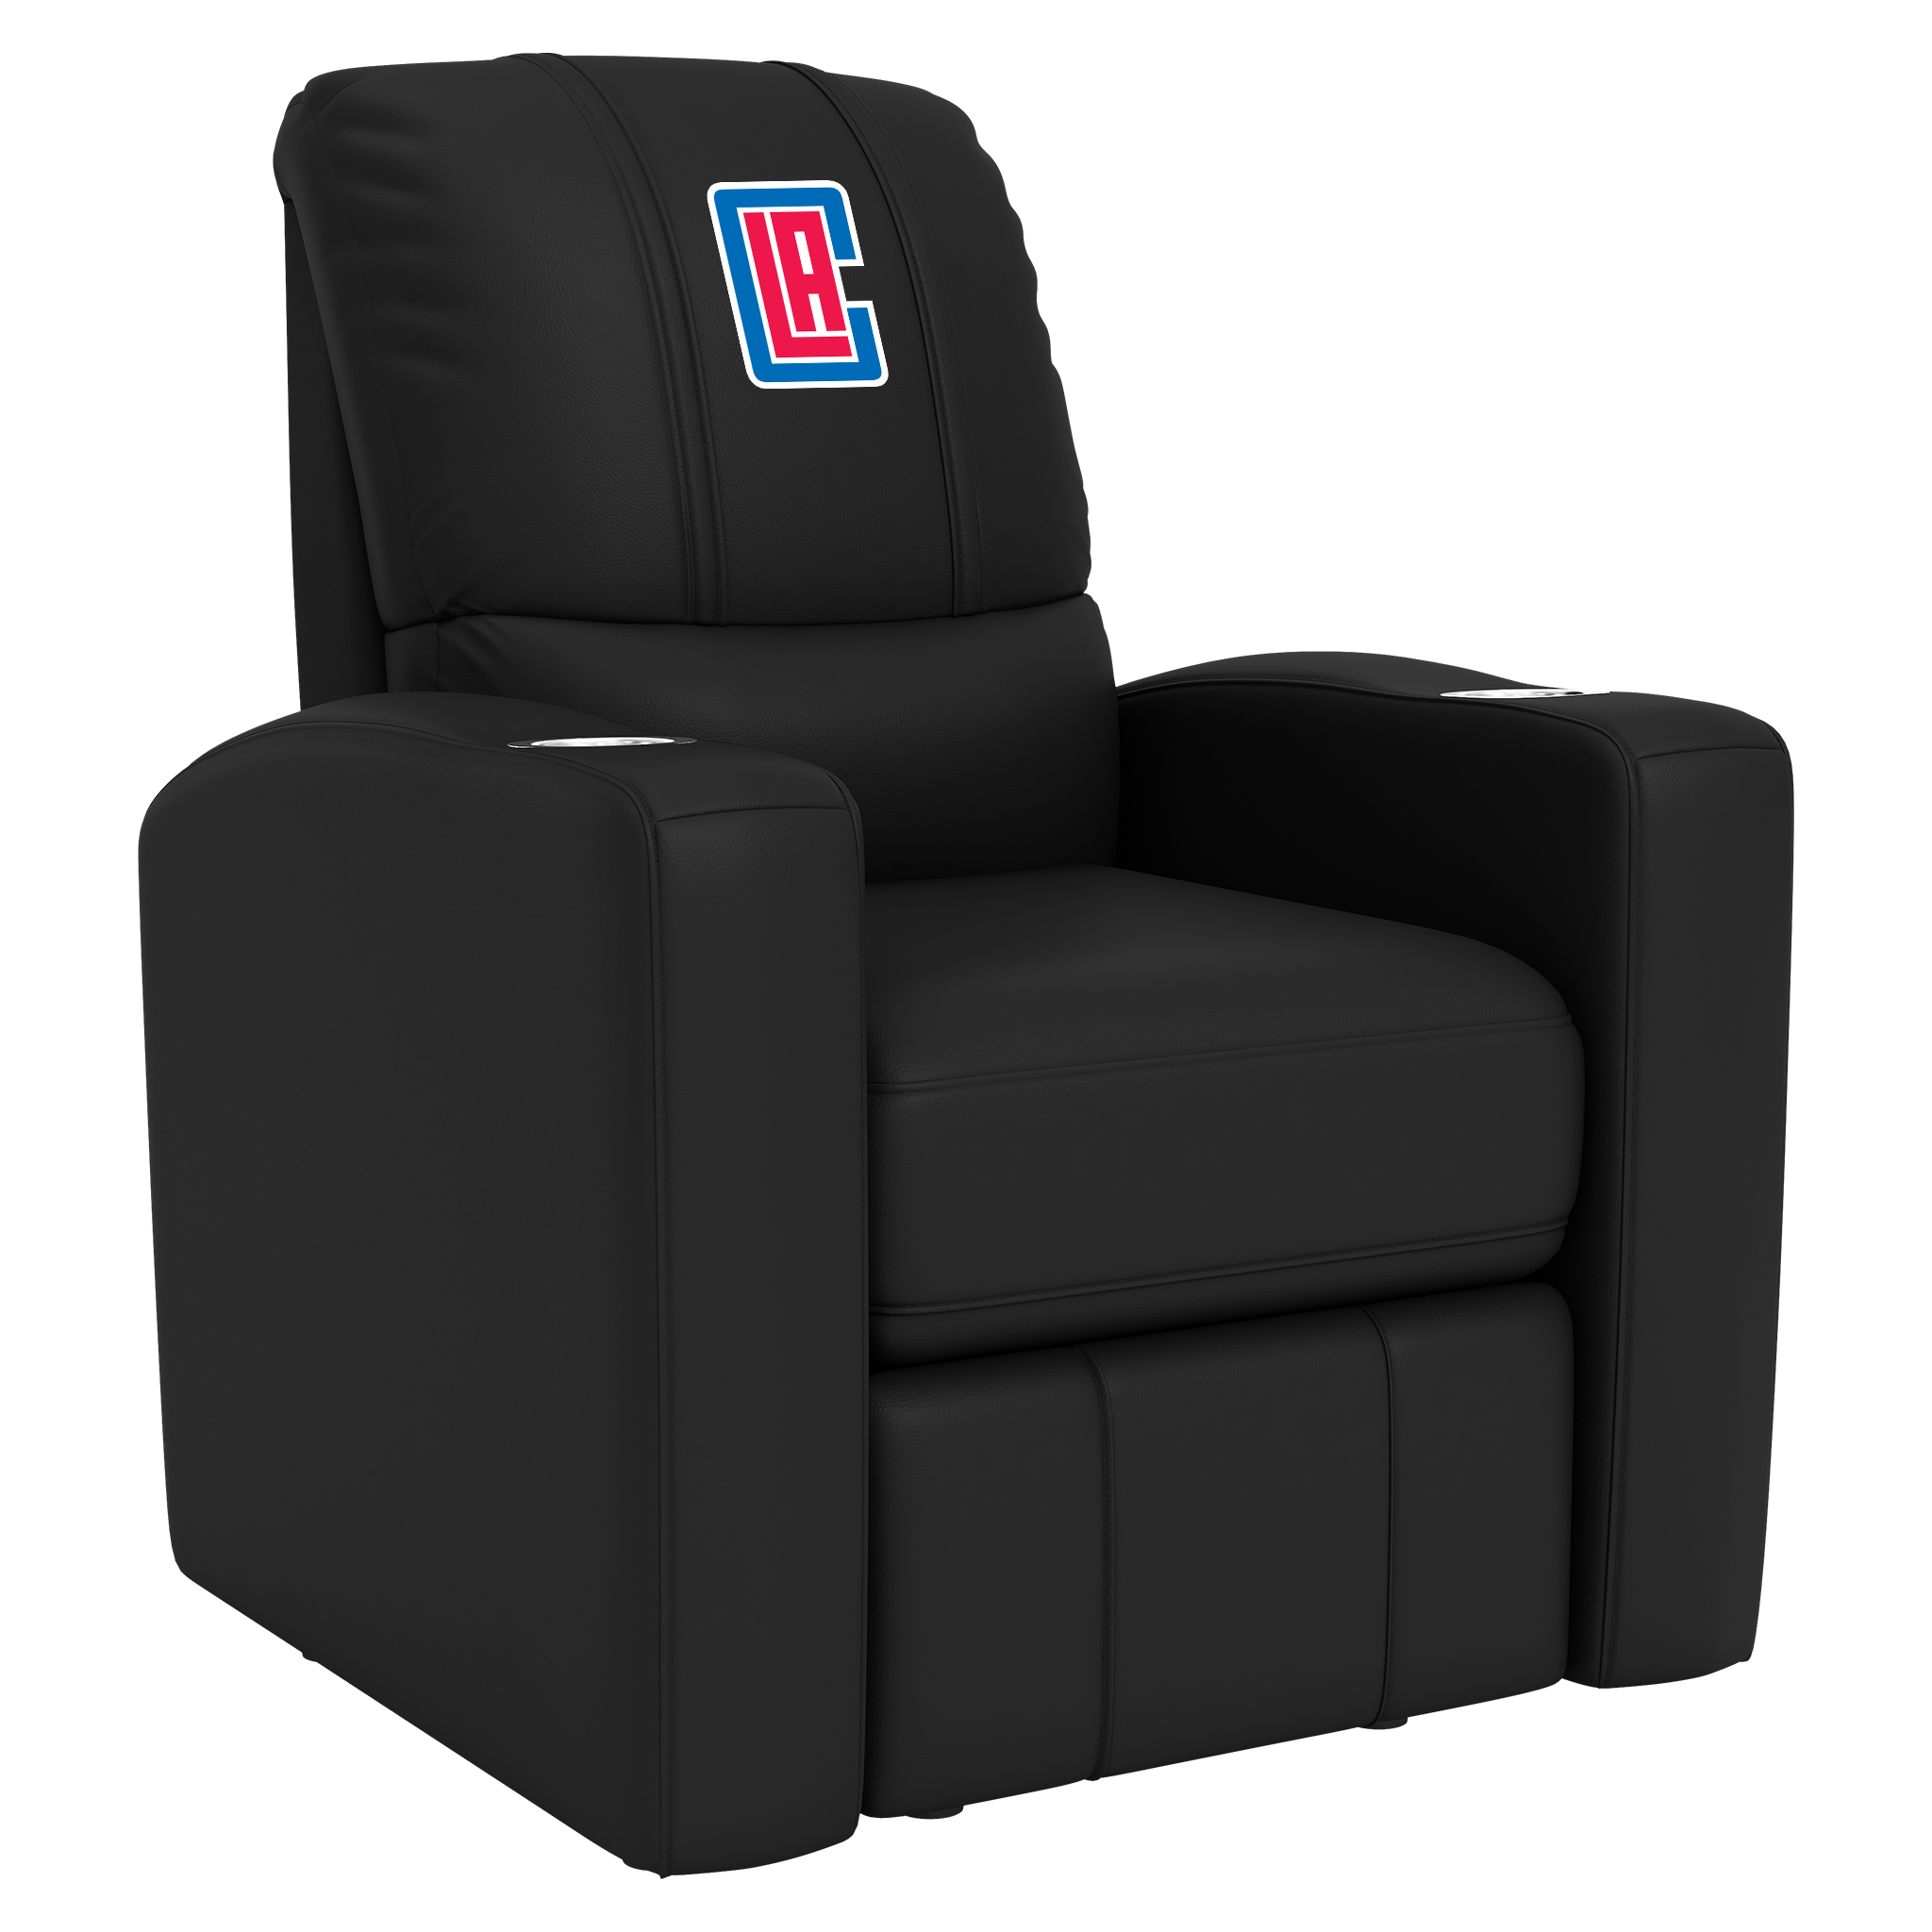 Los Angeles Clippers Stealth Recliner with Los Angeles Clippers Secondary